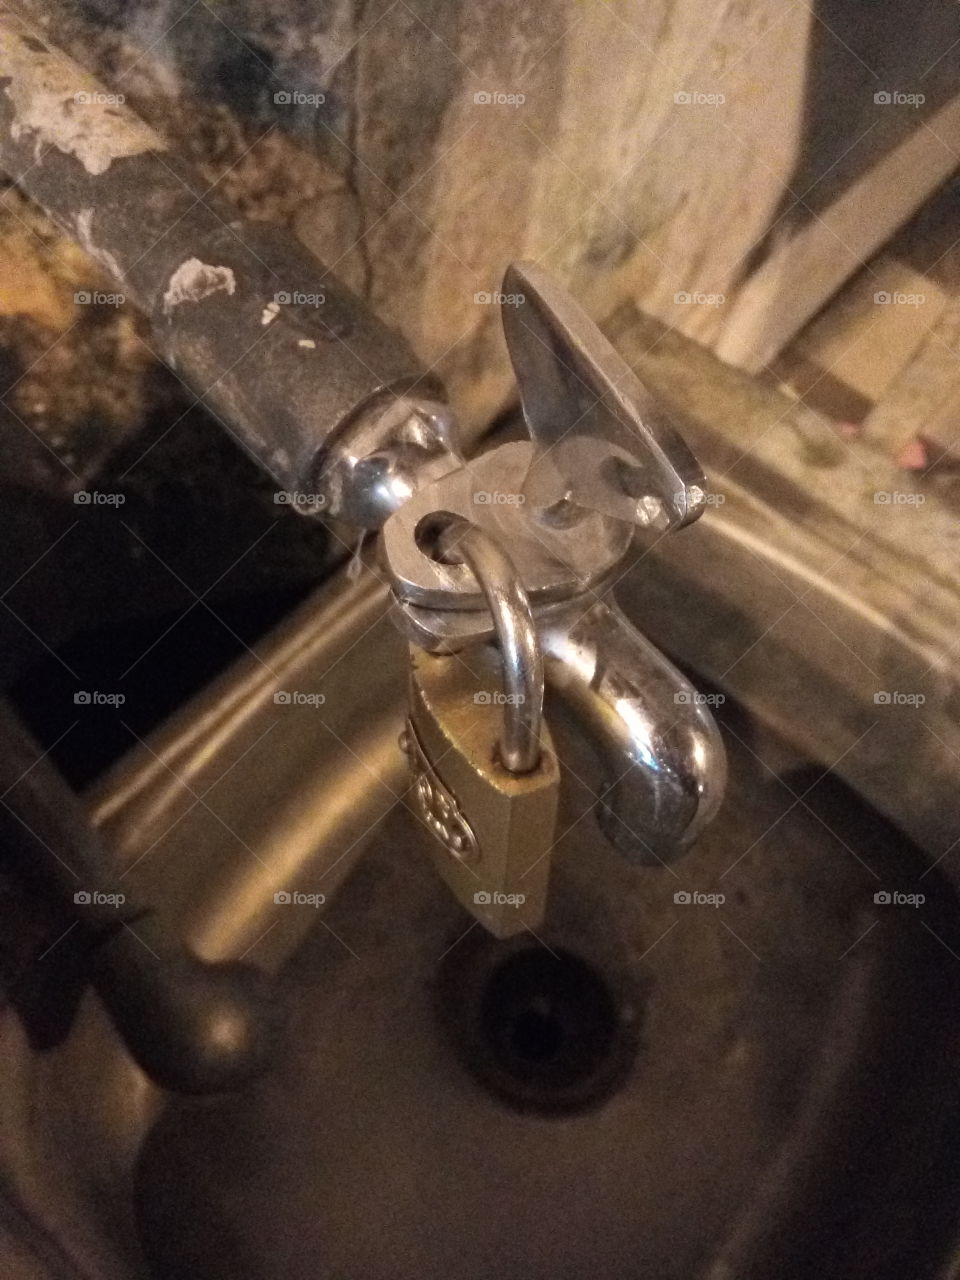 Lock on a Tap.